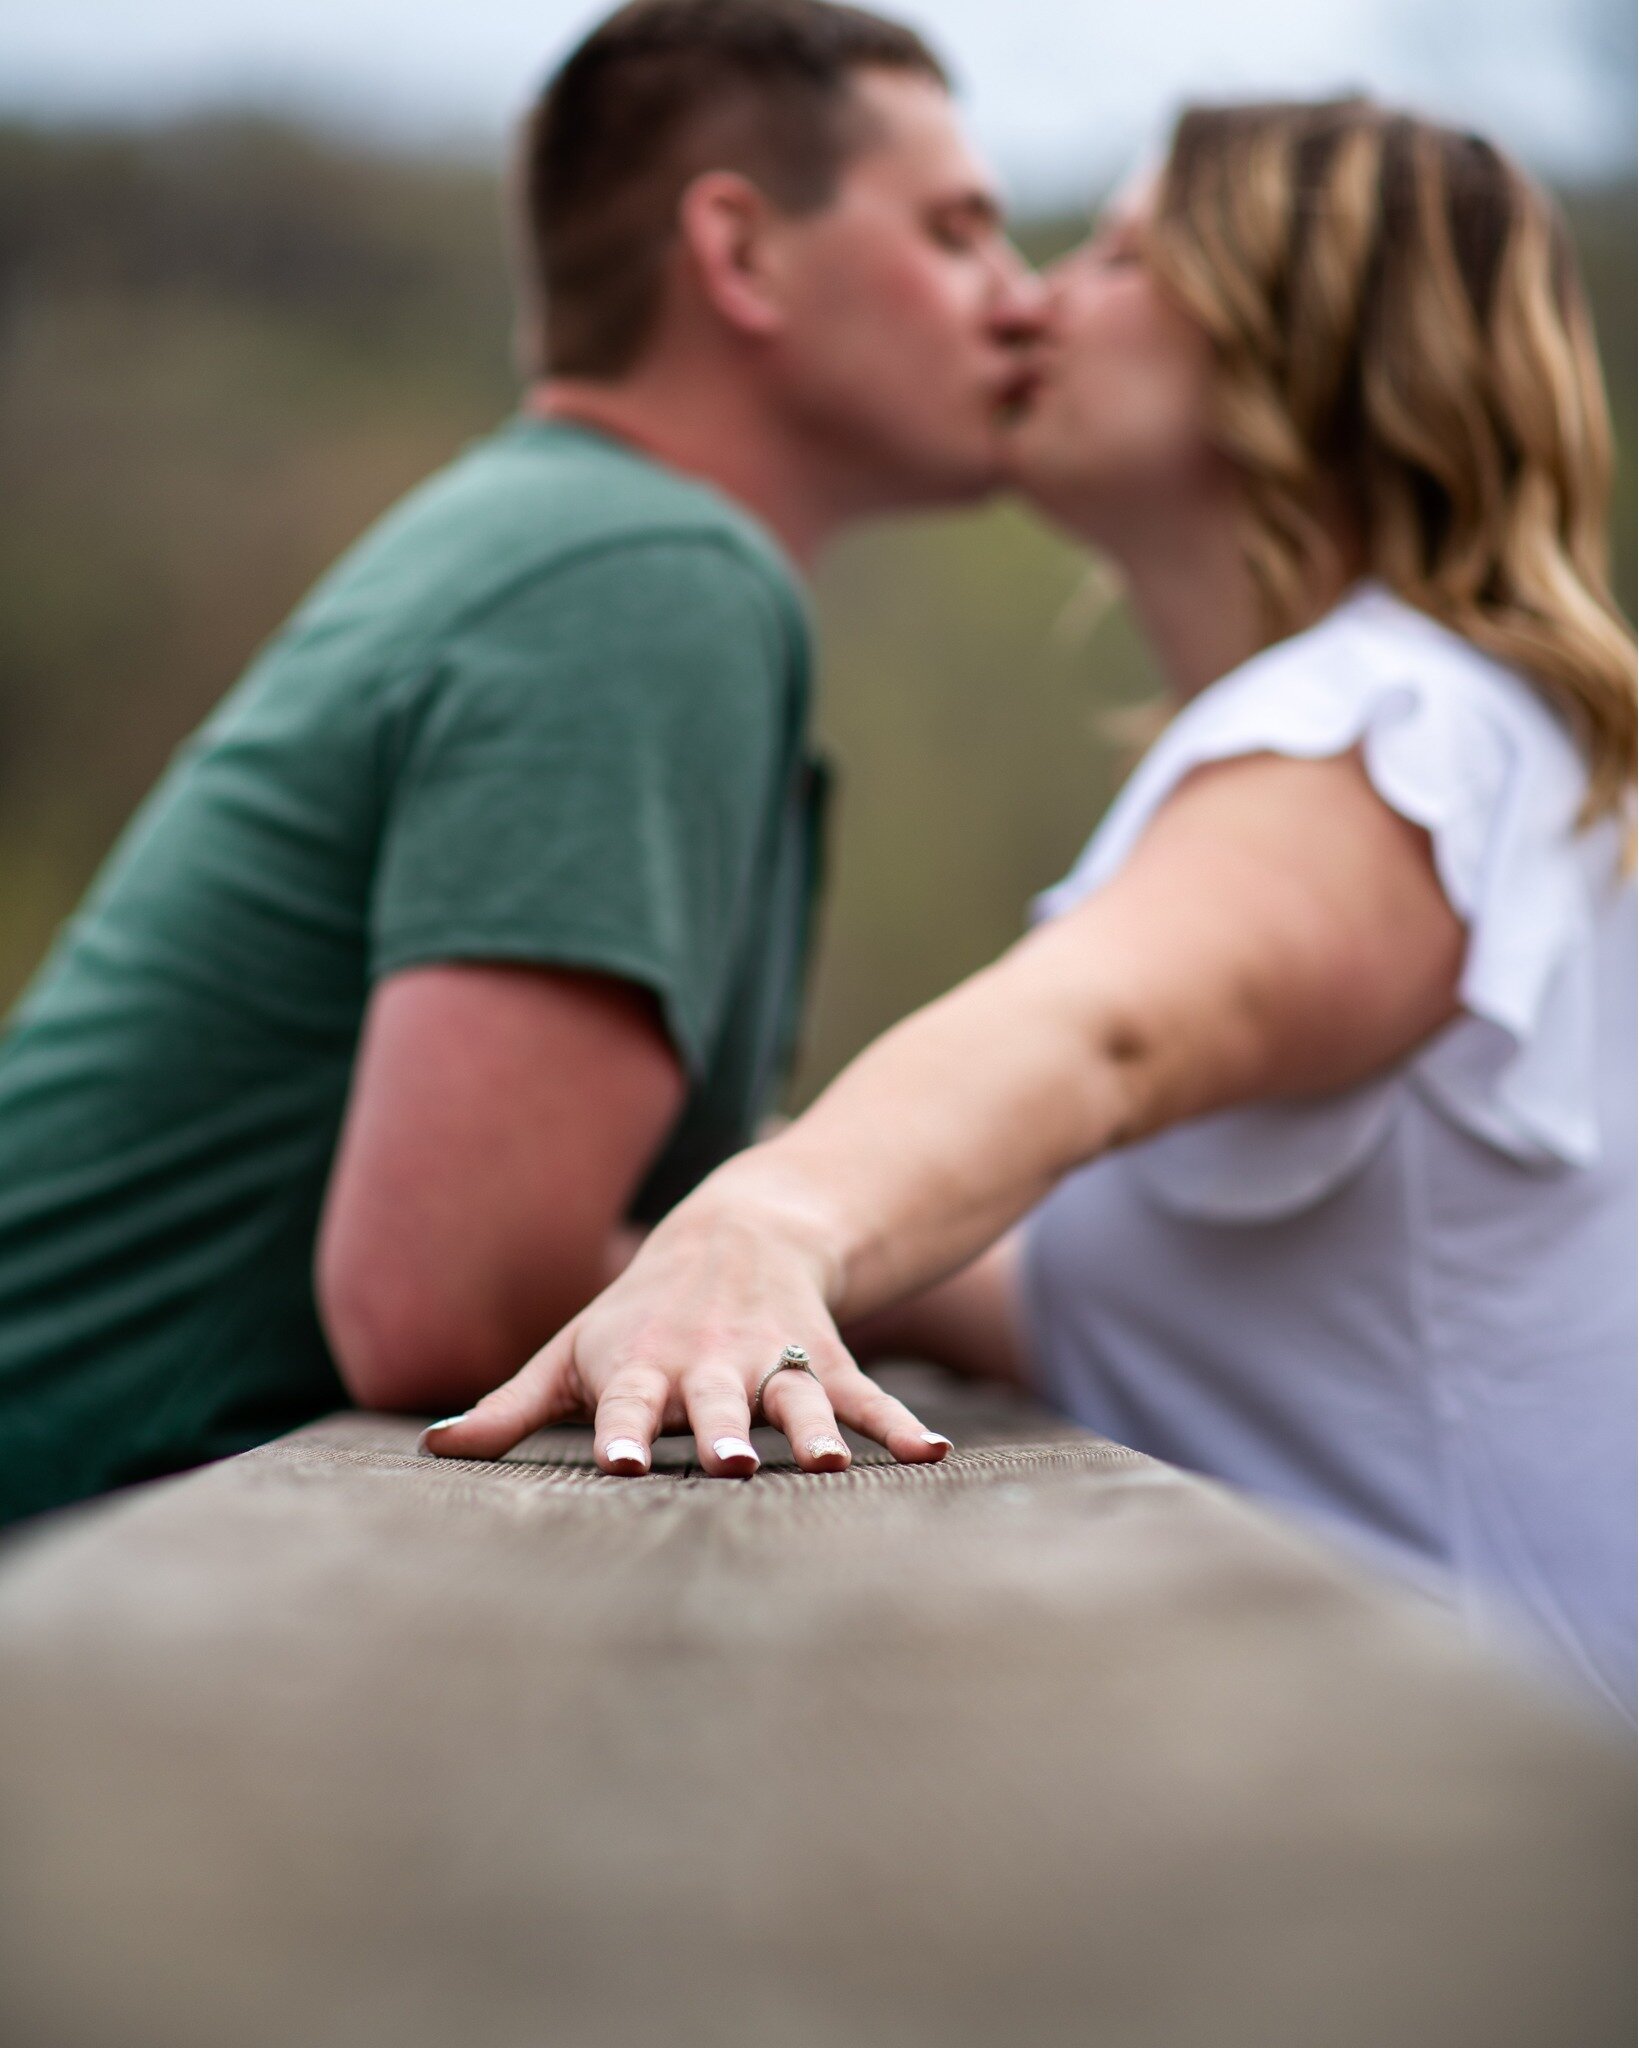 #sneakpeak of Courtney &amp; Andrew's #engagementphotos from a #engagementphotoshoot💍 at #SpanishMines in Dubuque, IA. 

We are currently booking 2024 #weddings right now so don't delay! 
#quadcitybrides, #iowabrides, #illinoisbrides, #bride, #groom